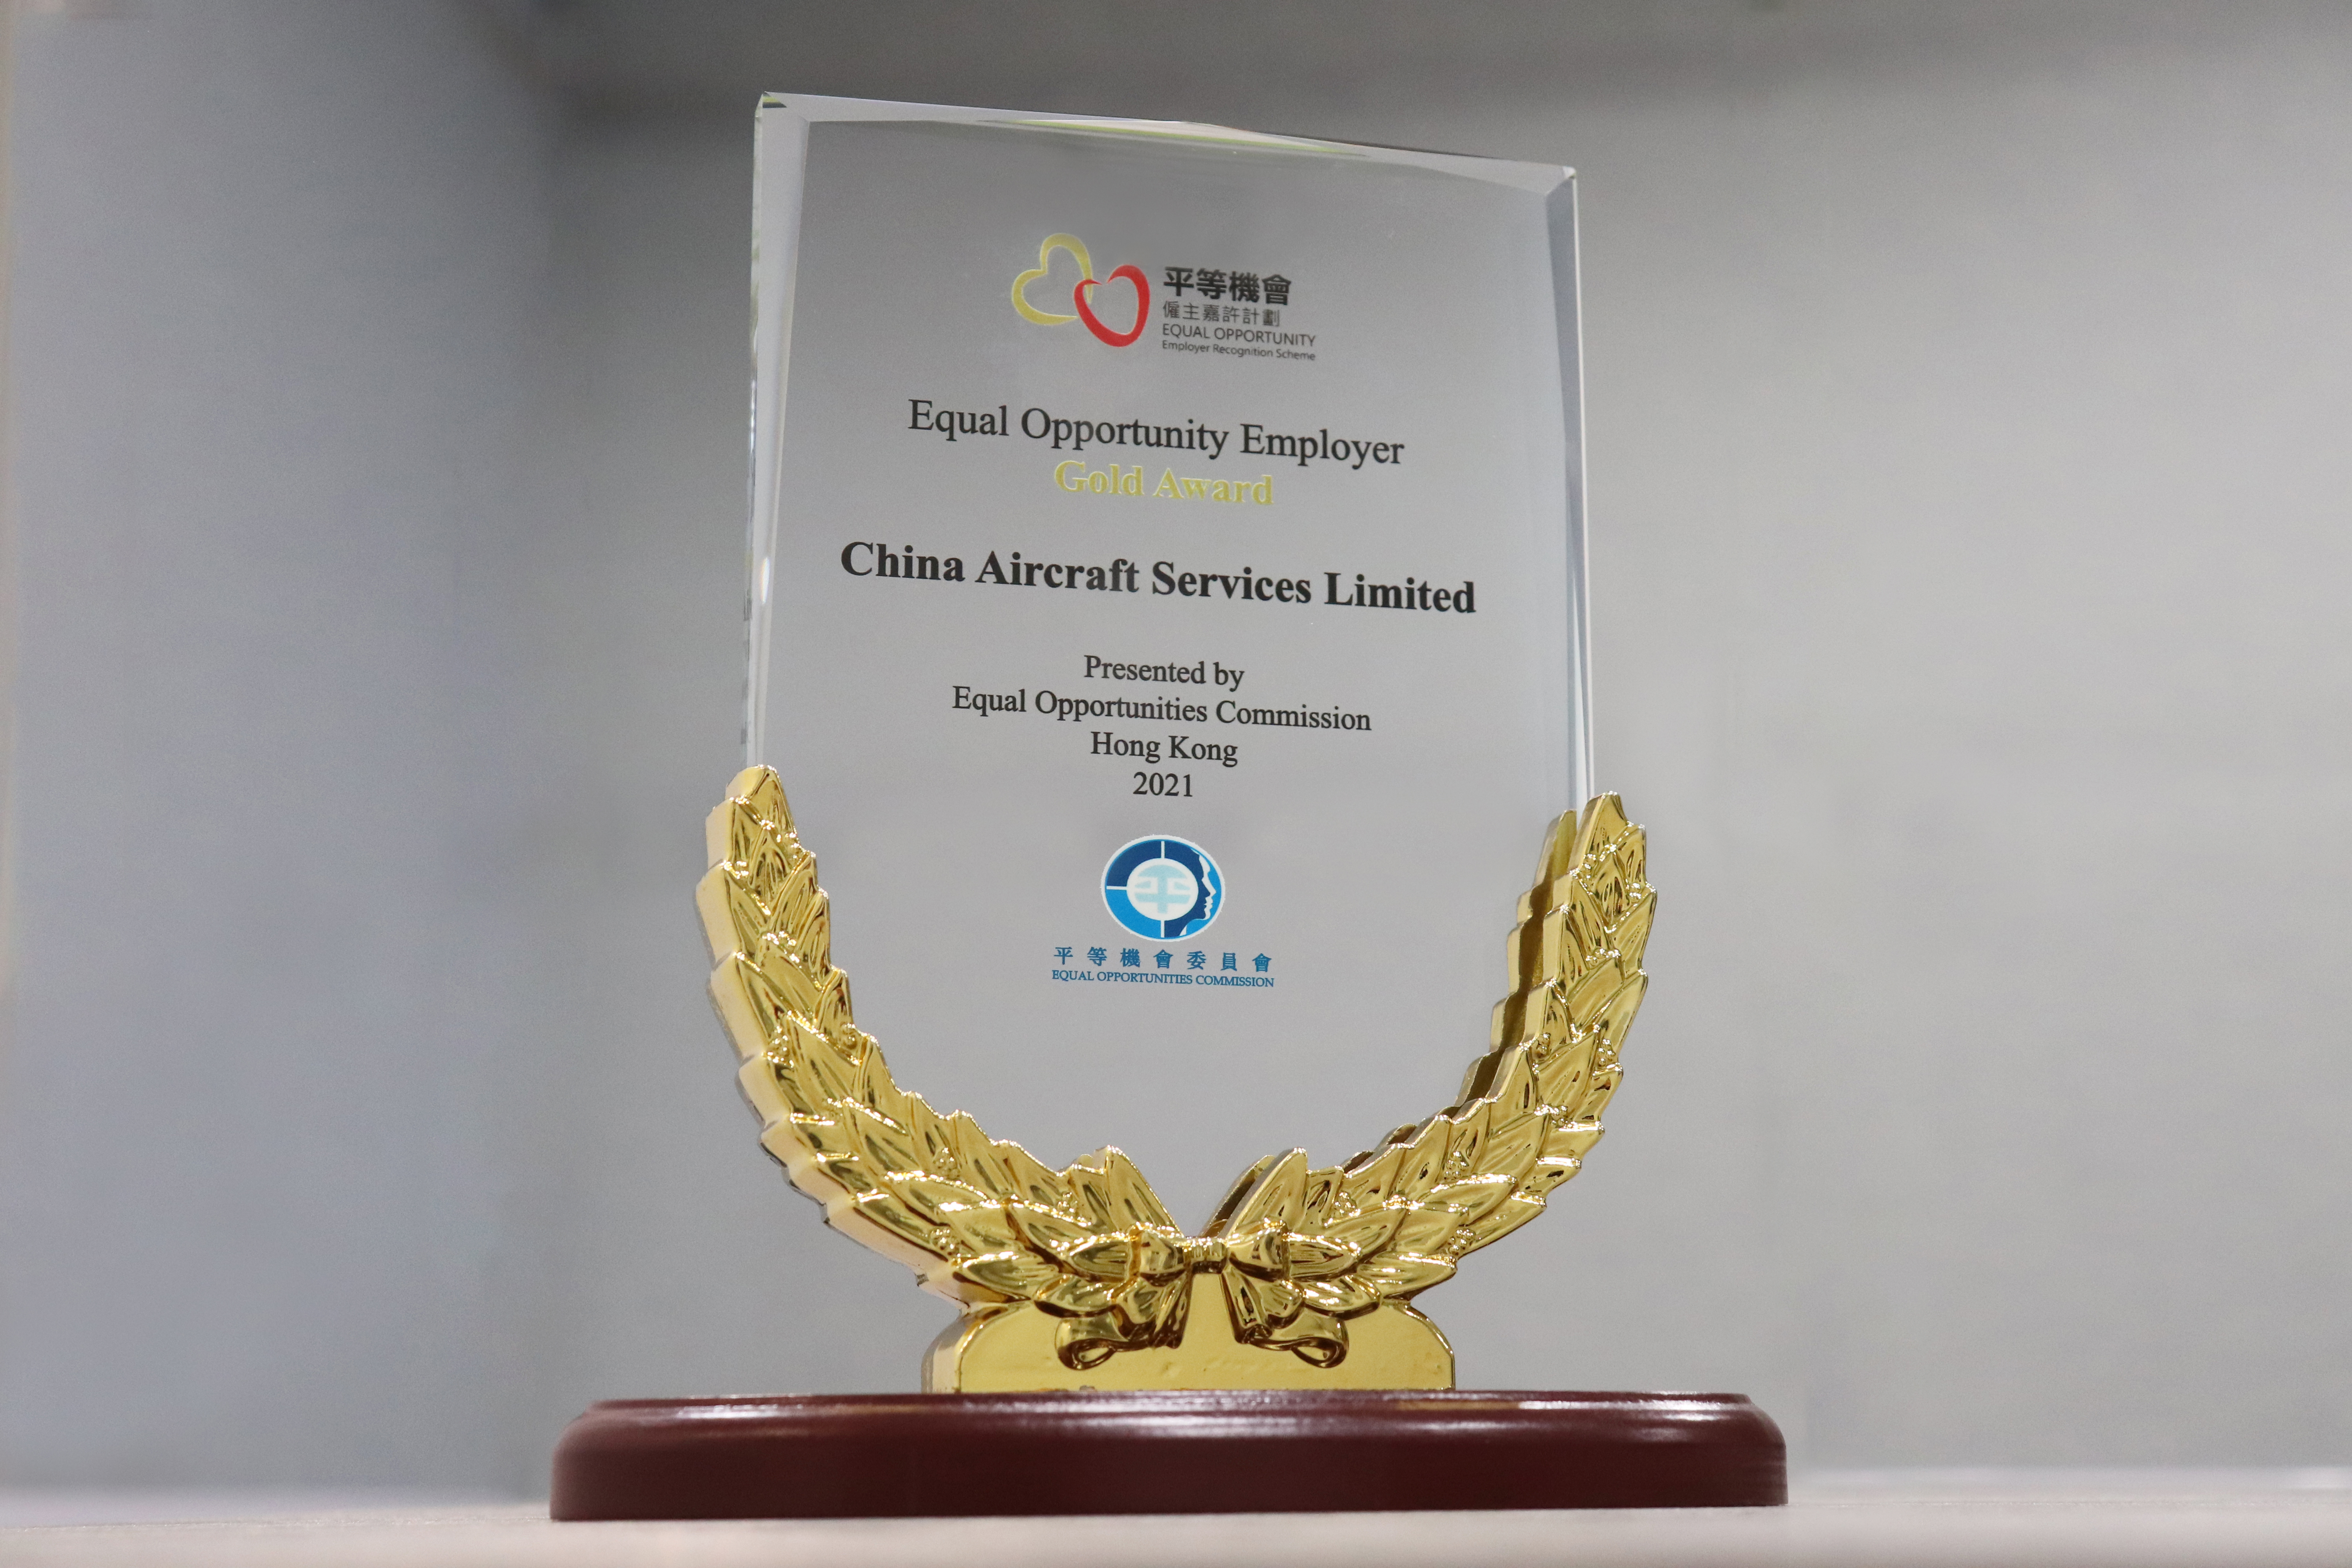 CASL first in HKIA to receive Equal Opportunity Employer Gold Award